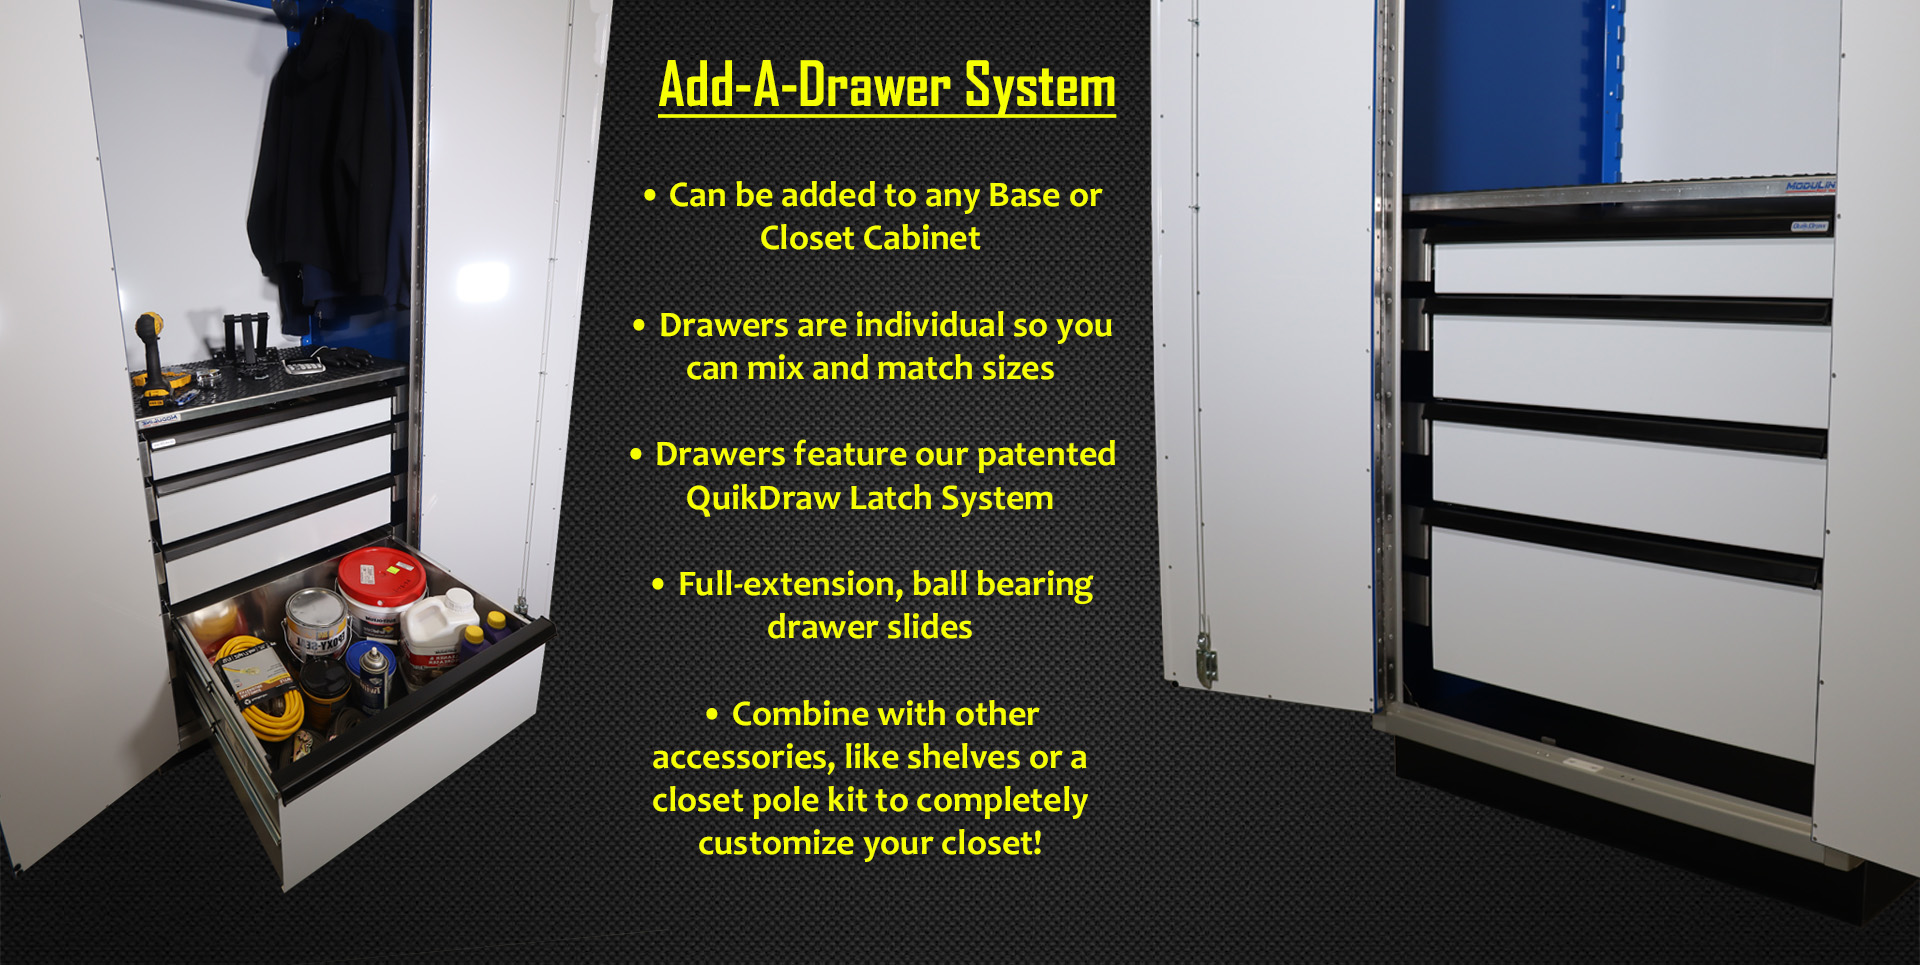 Add-A-Drawer system features bullet points